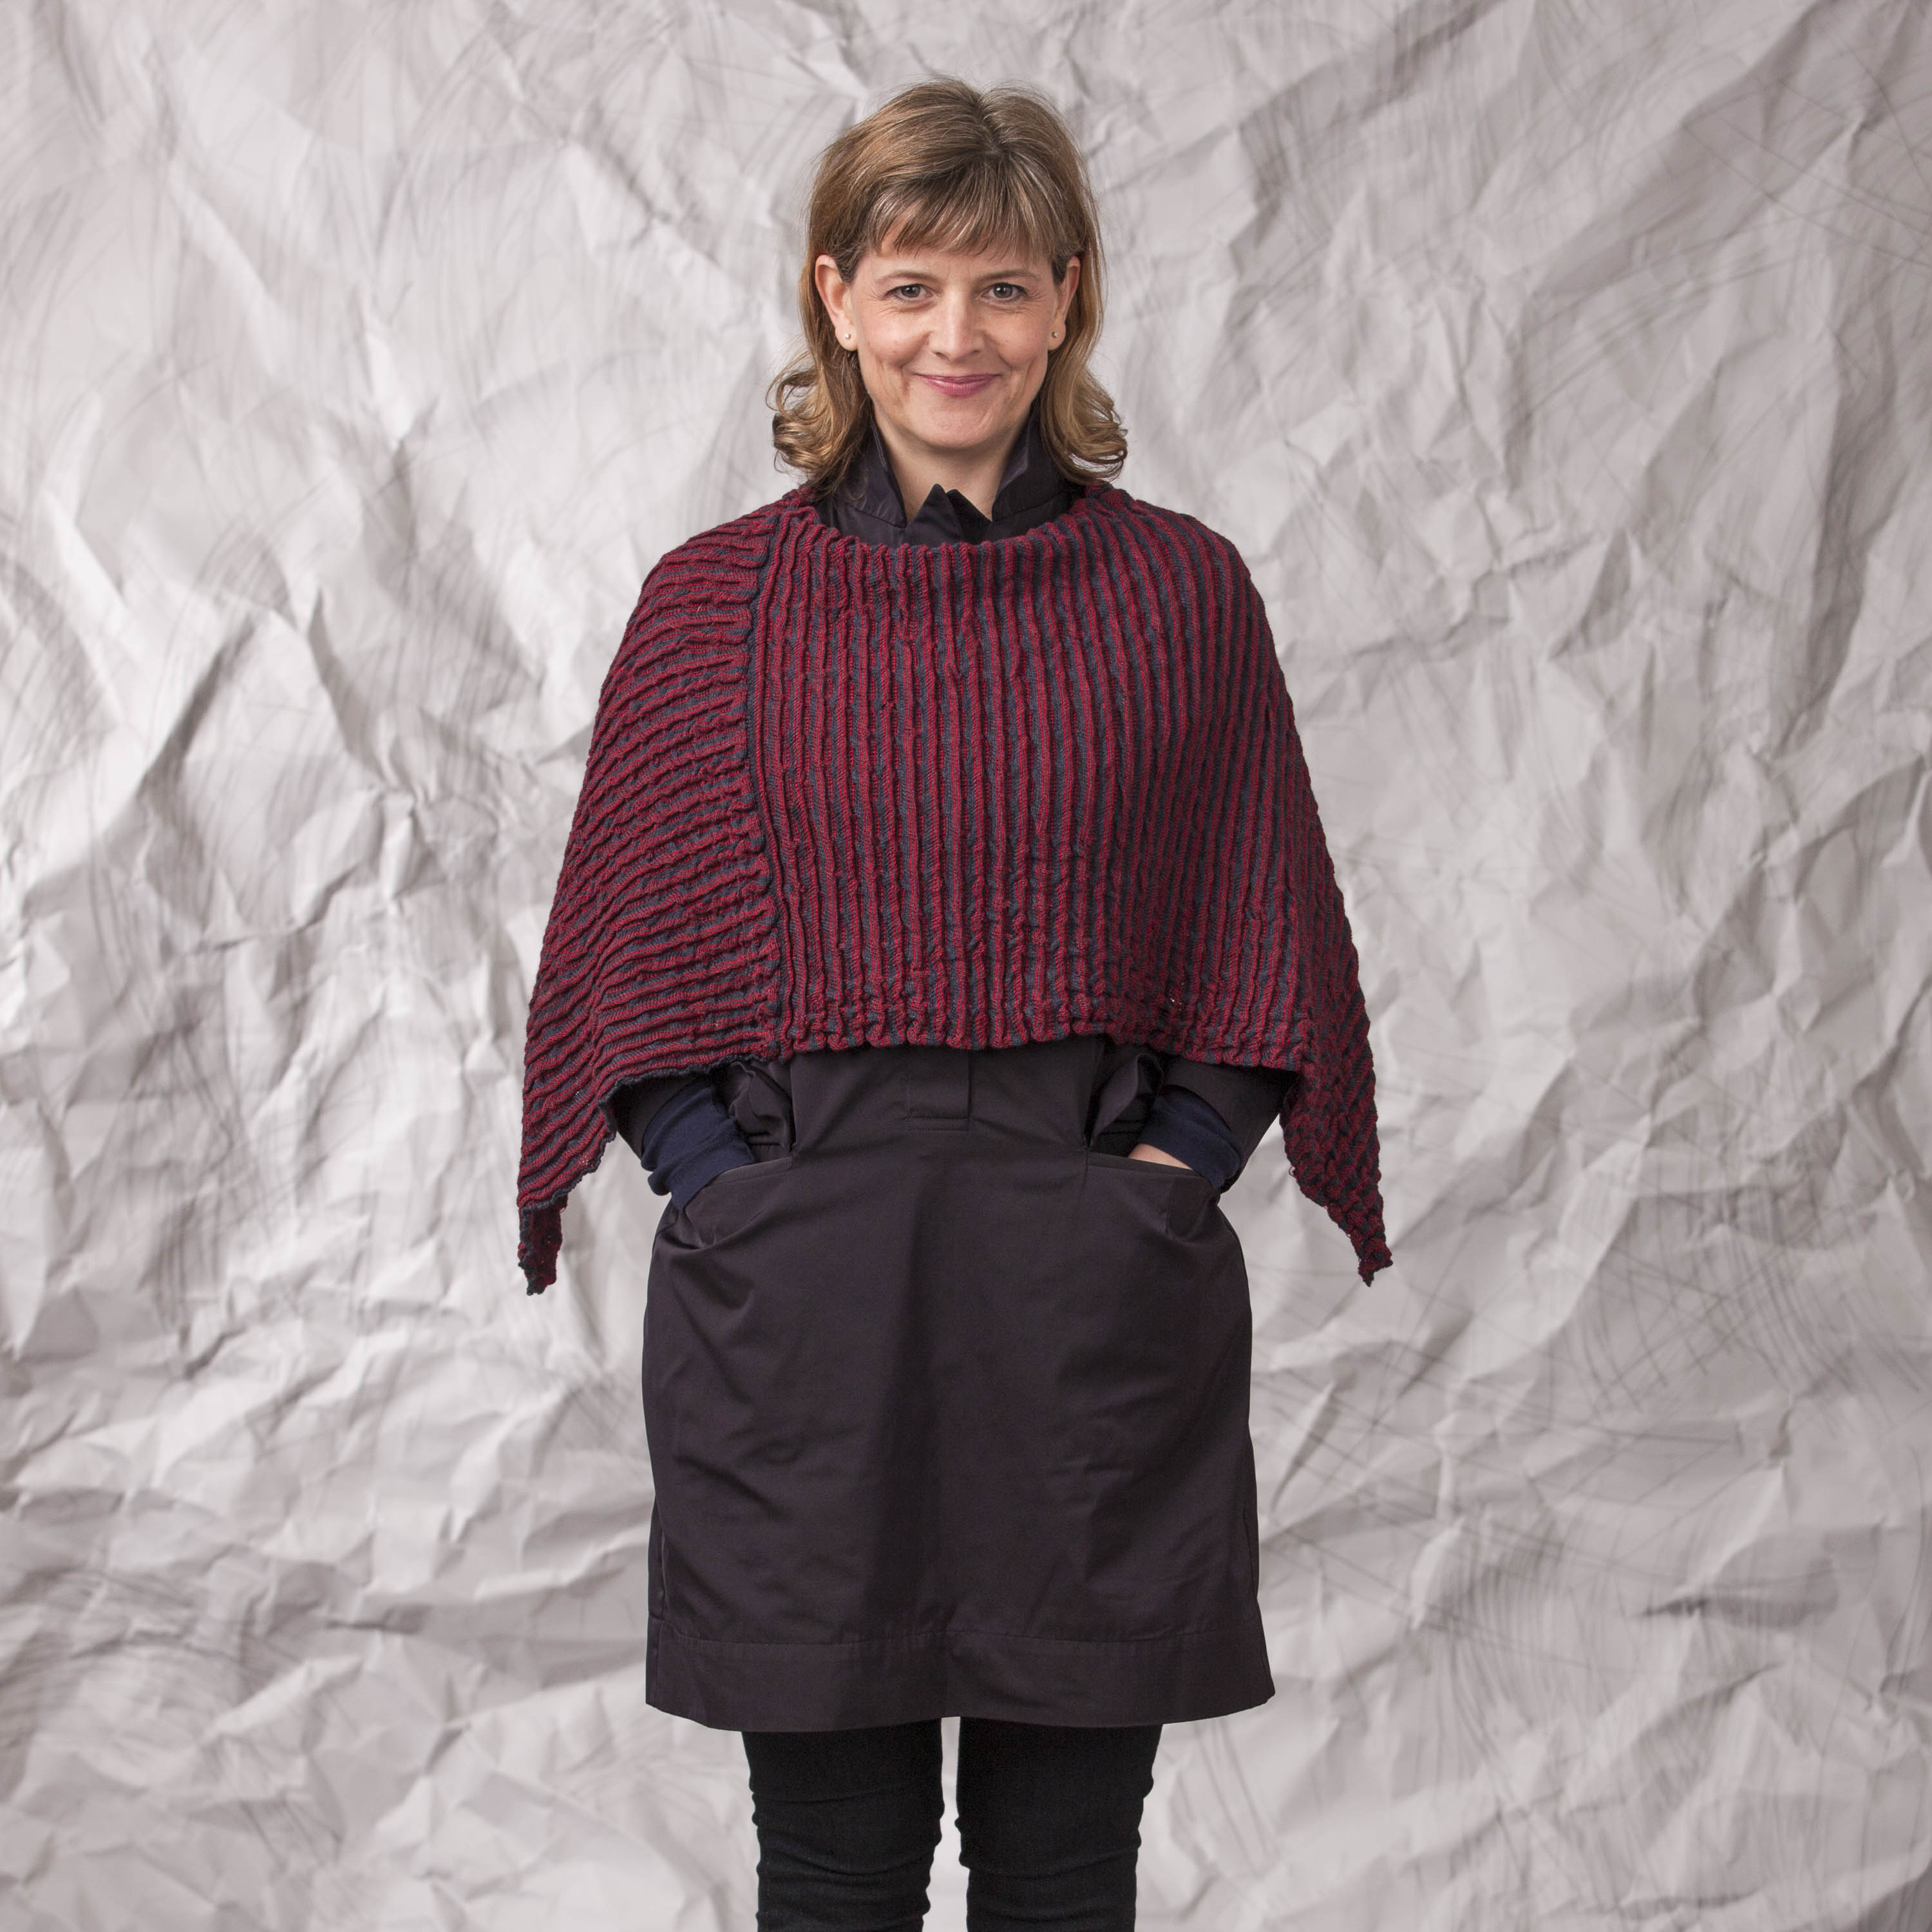 Contemporary Scottish knitwear, poncho in gently ridged fabric in dark berry coloured. Worn by a woman, over a navy shirt dress